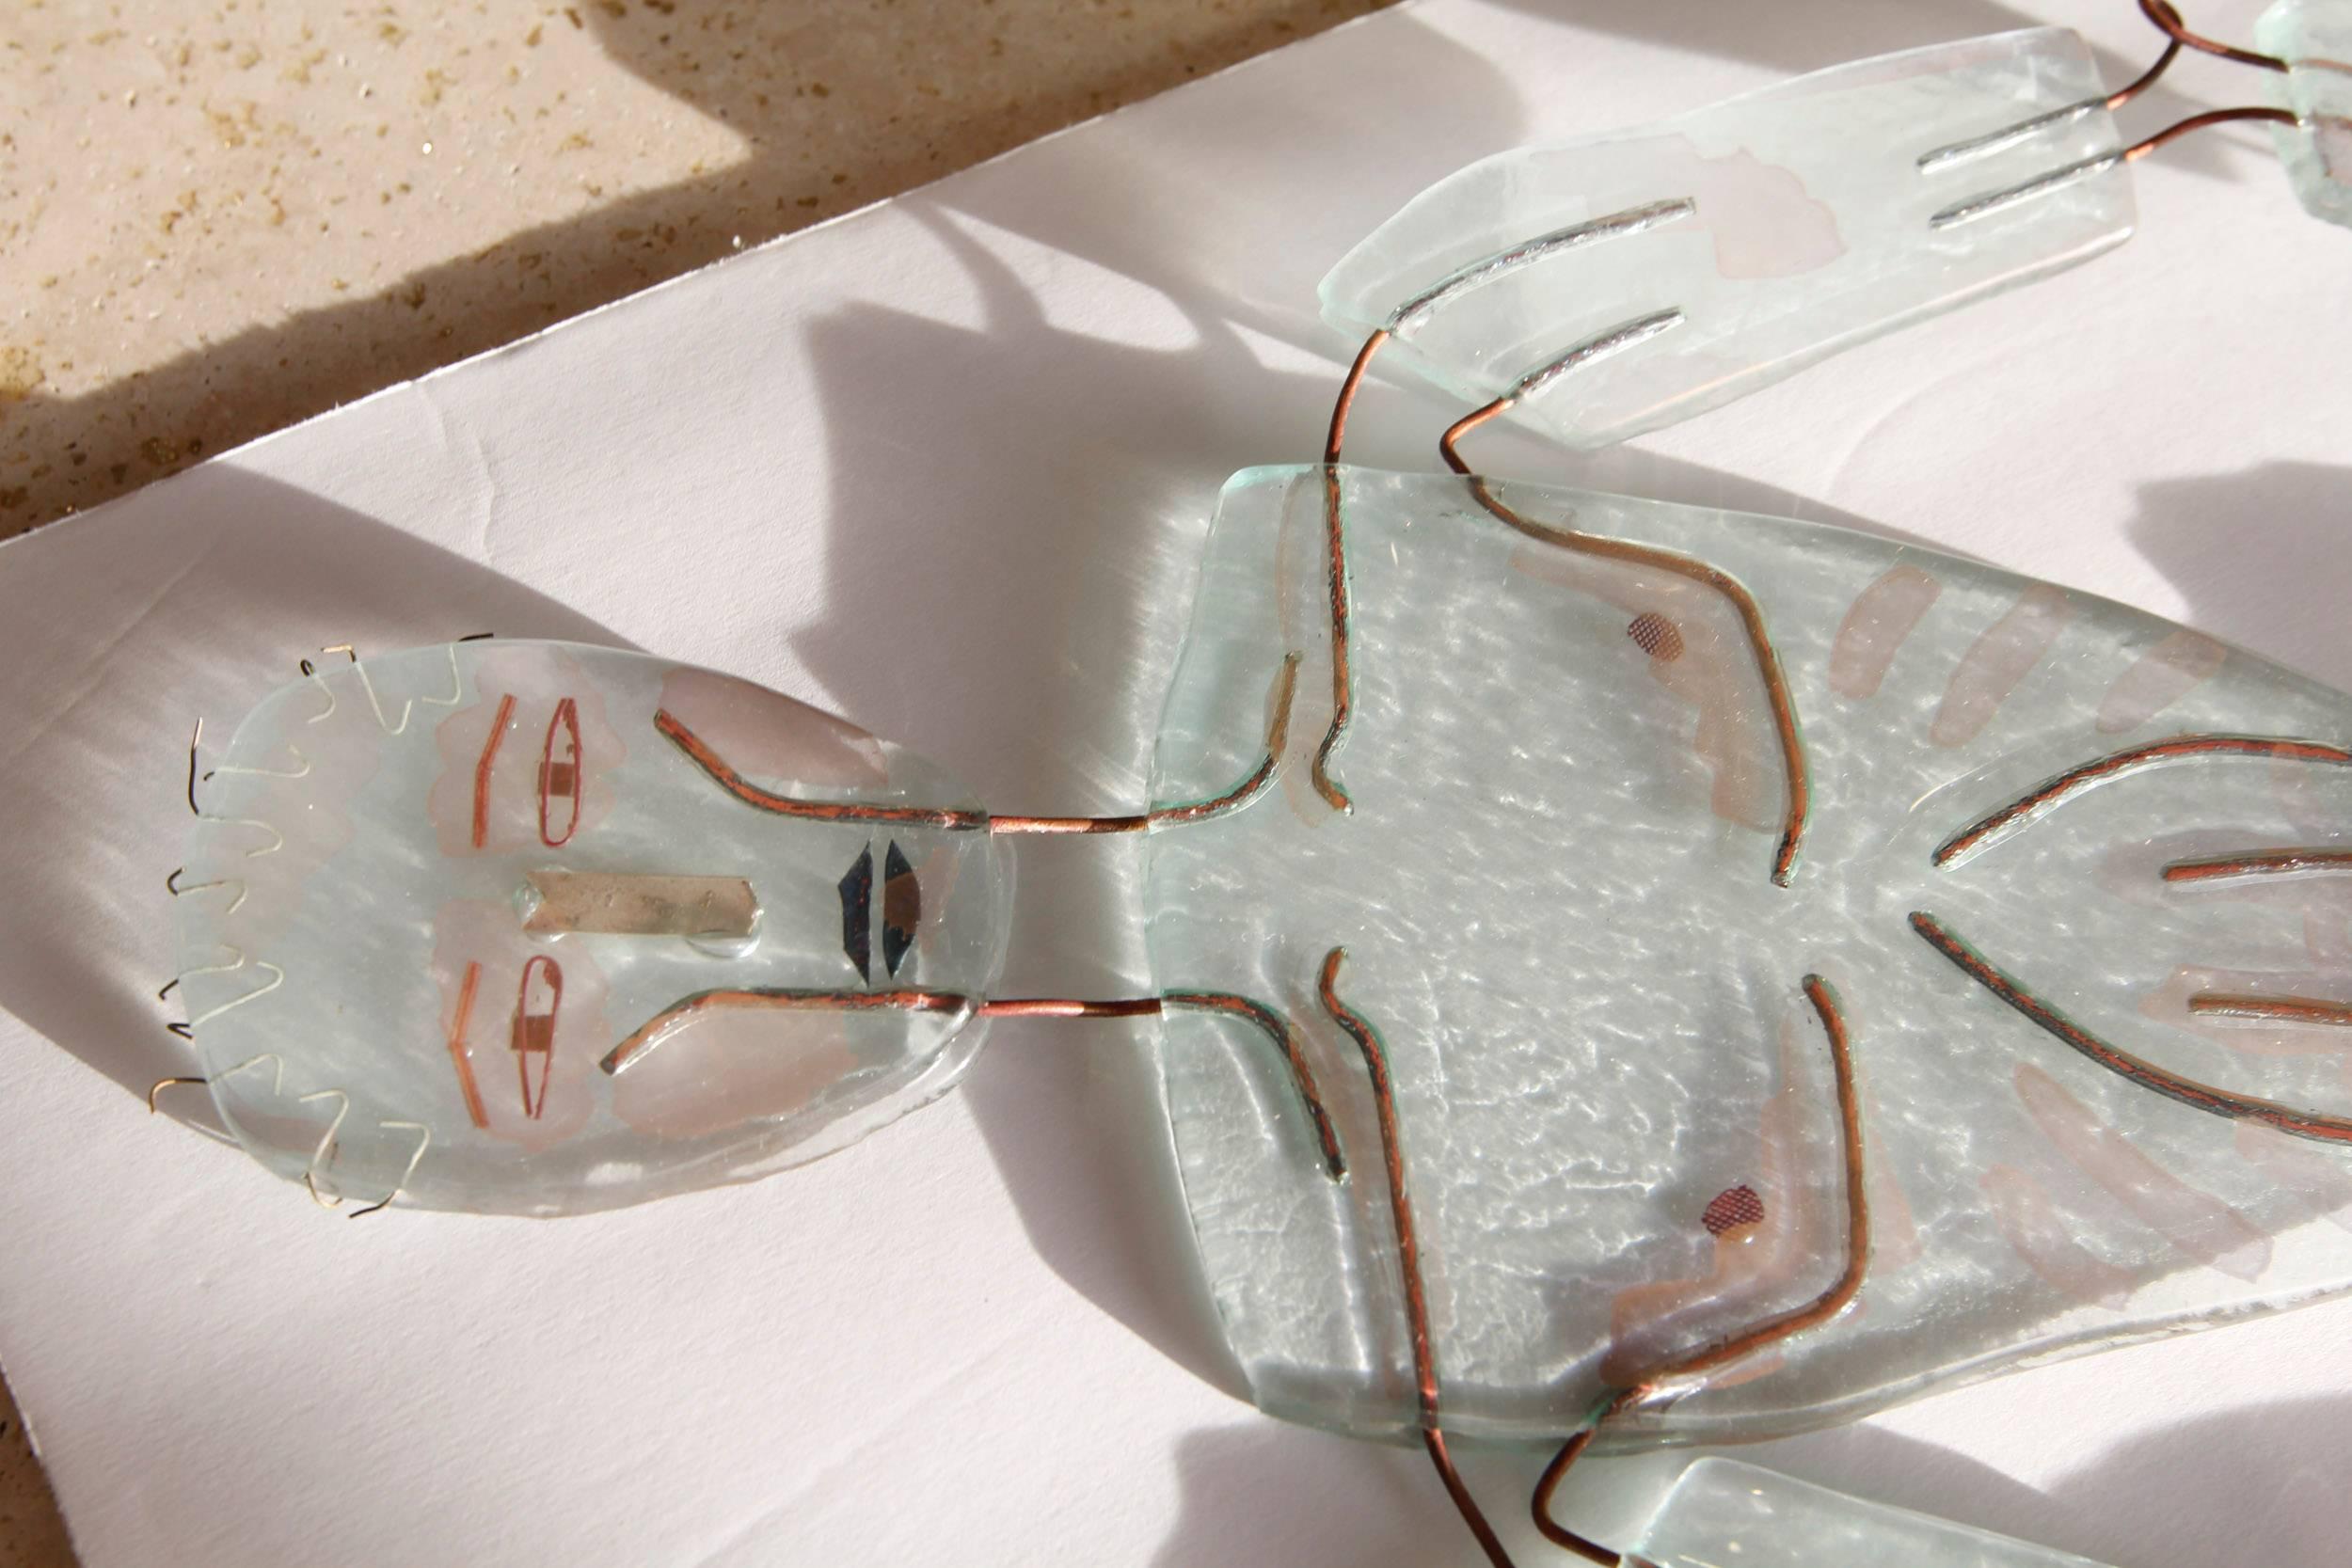 American Mr and Mrs Transparency Glass Figures by Artist